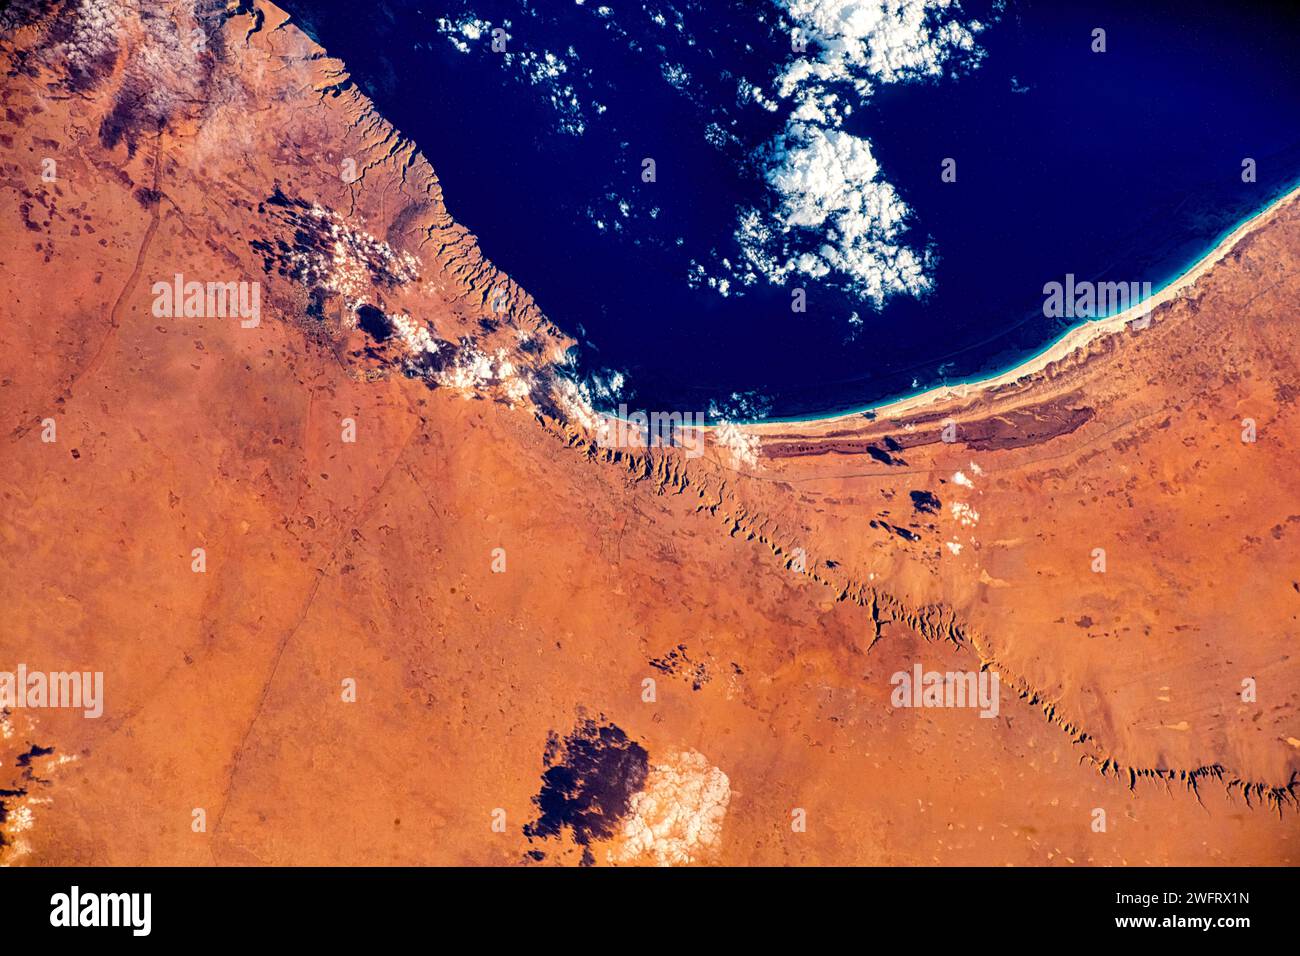 Desert coastline in the border of Egypt and Lybia. Digital enhancement of a NASA image. Stock Photo